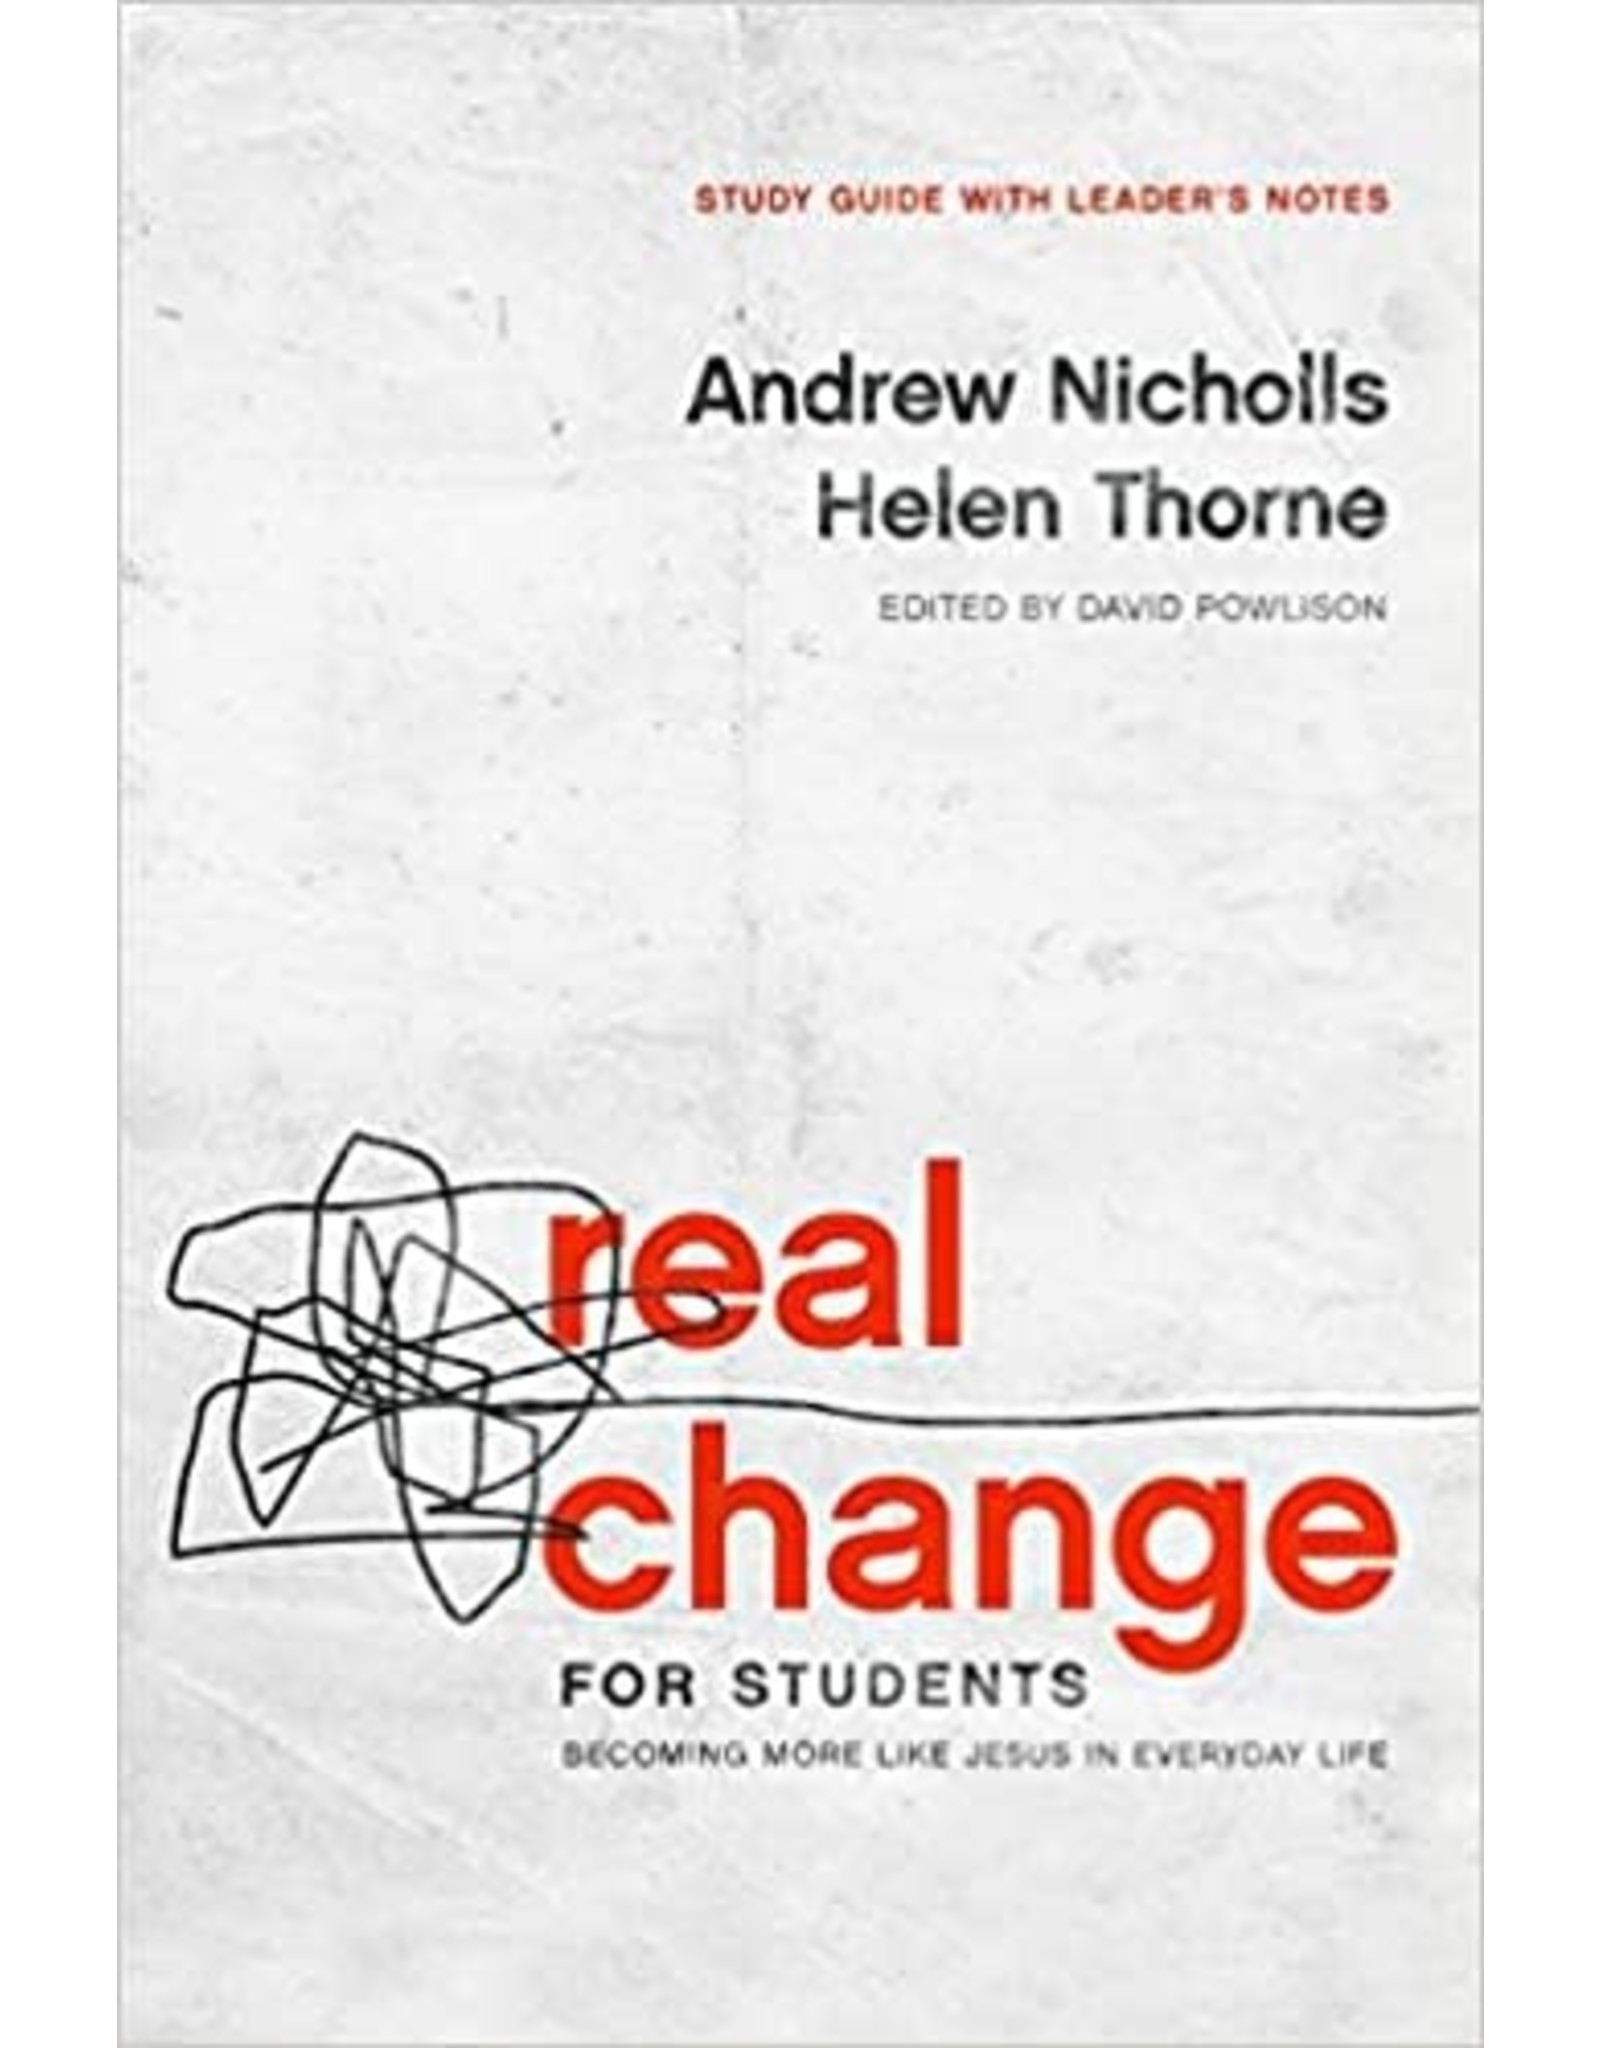 Andrew Nicholls, Helen Thorne & David Powlison Real Change for Students: Becoming More Like Jesus in Everyday Life (Study Guide with Leader's Notes)